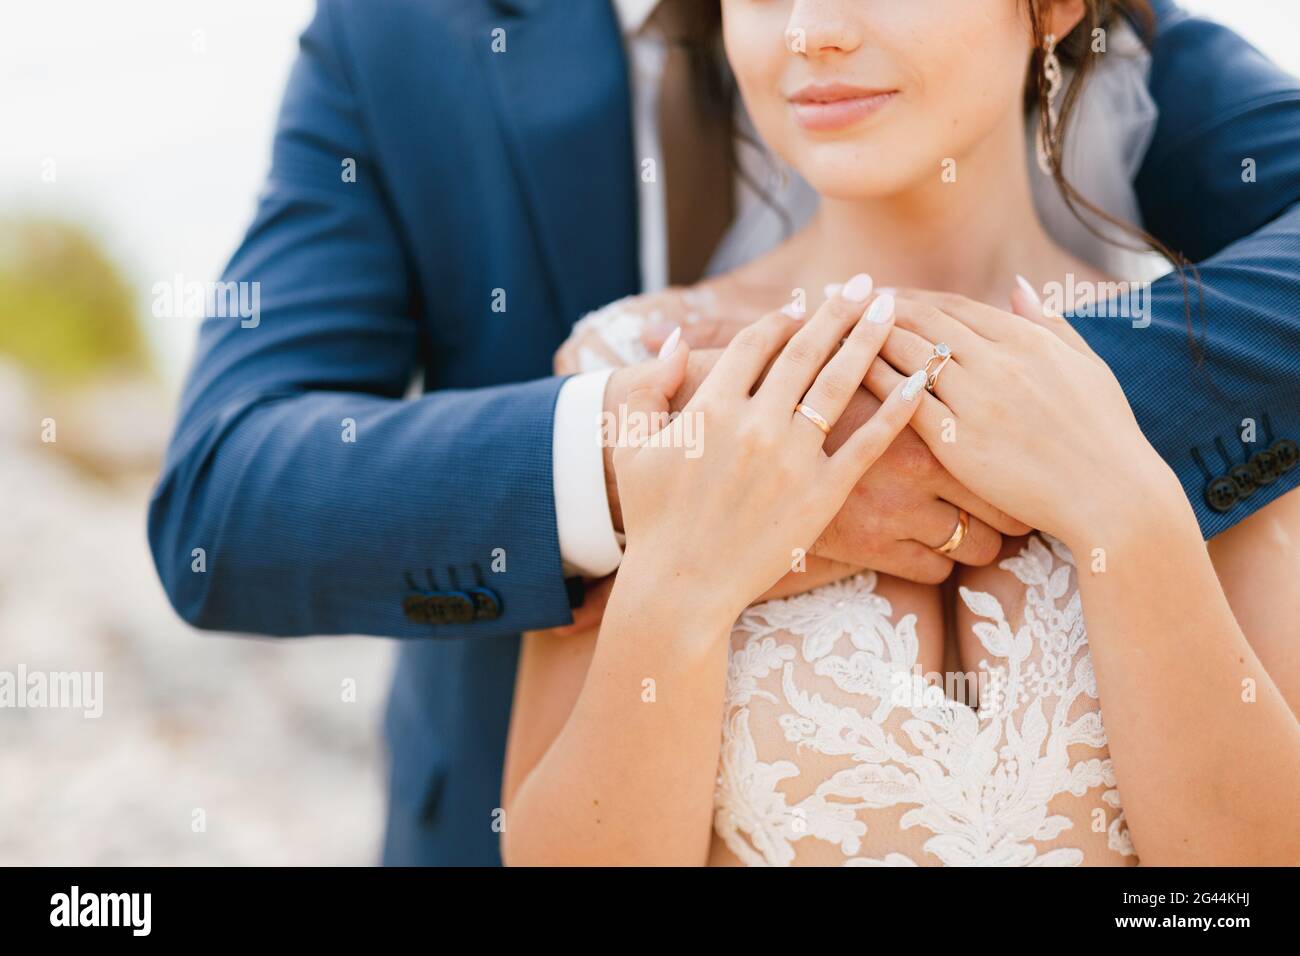 The groom gently hugs the bride by the shoulders, the bride put her hands on the groom's arms, close-up Stock Photo